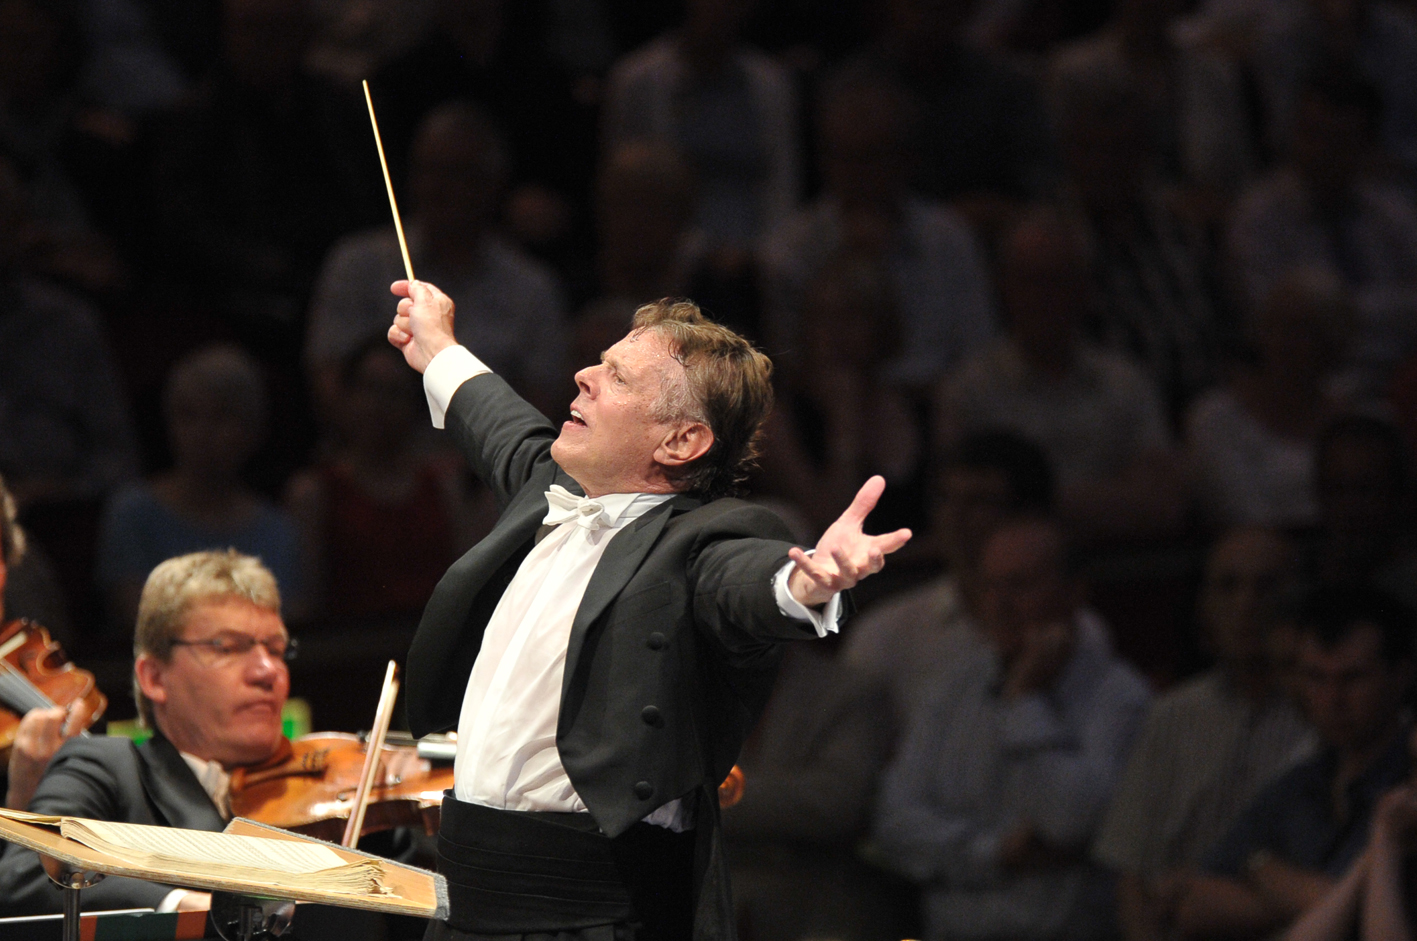 Mariss Jansons at the Proms pictured by Chris Christodoulou